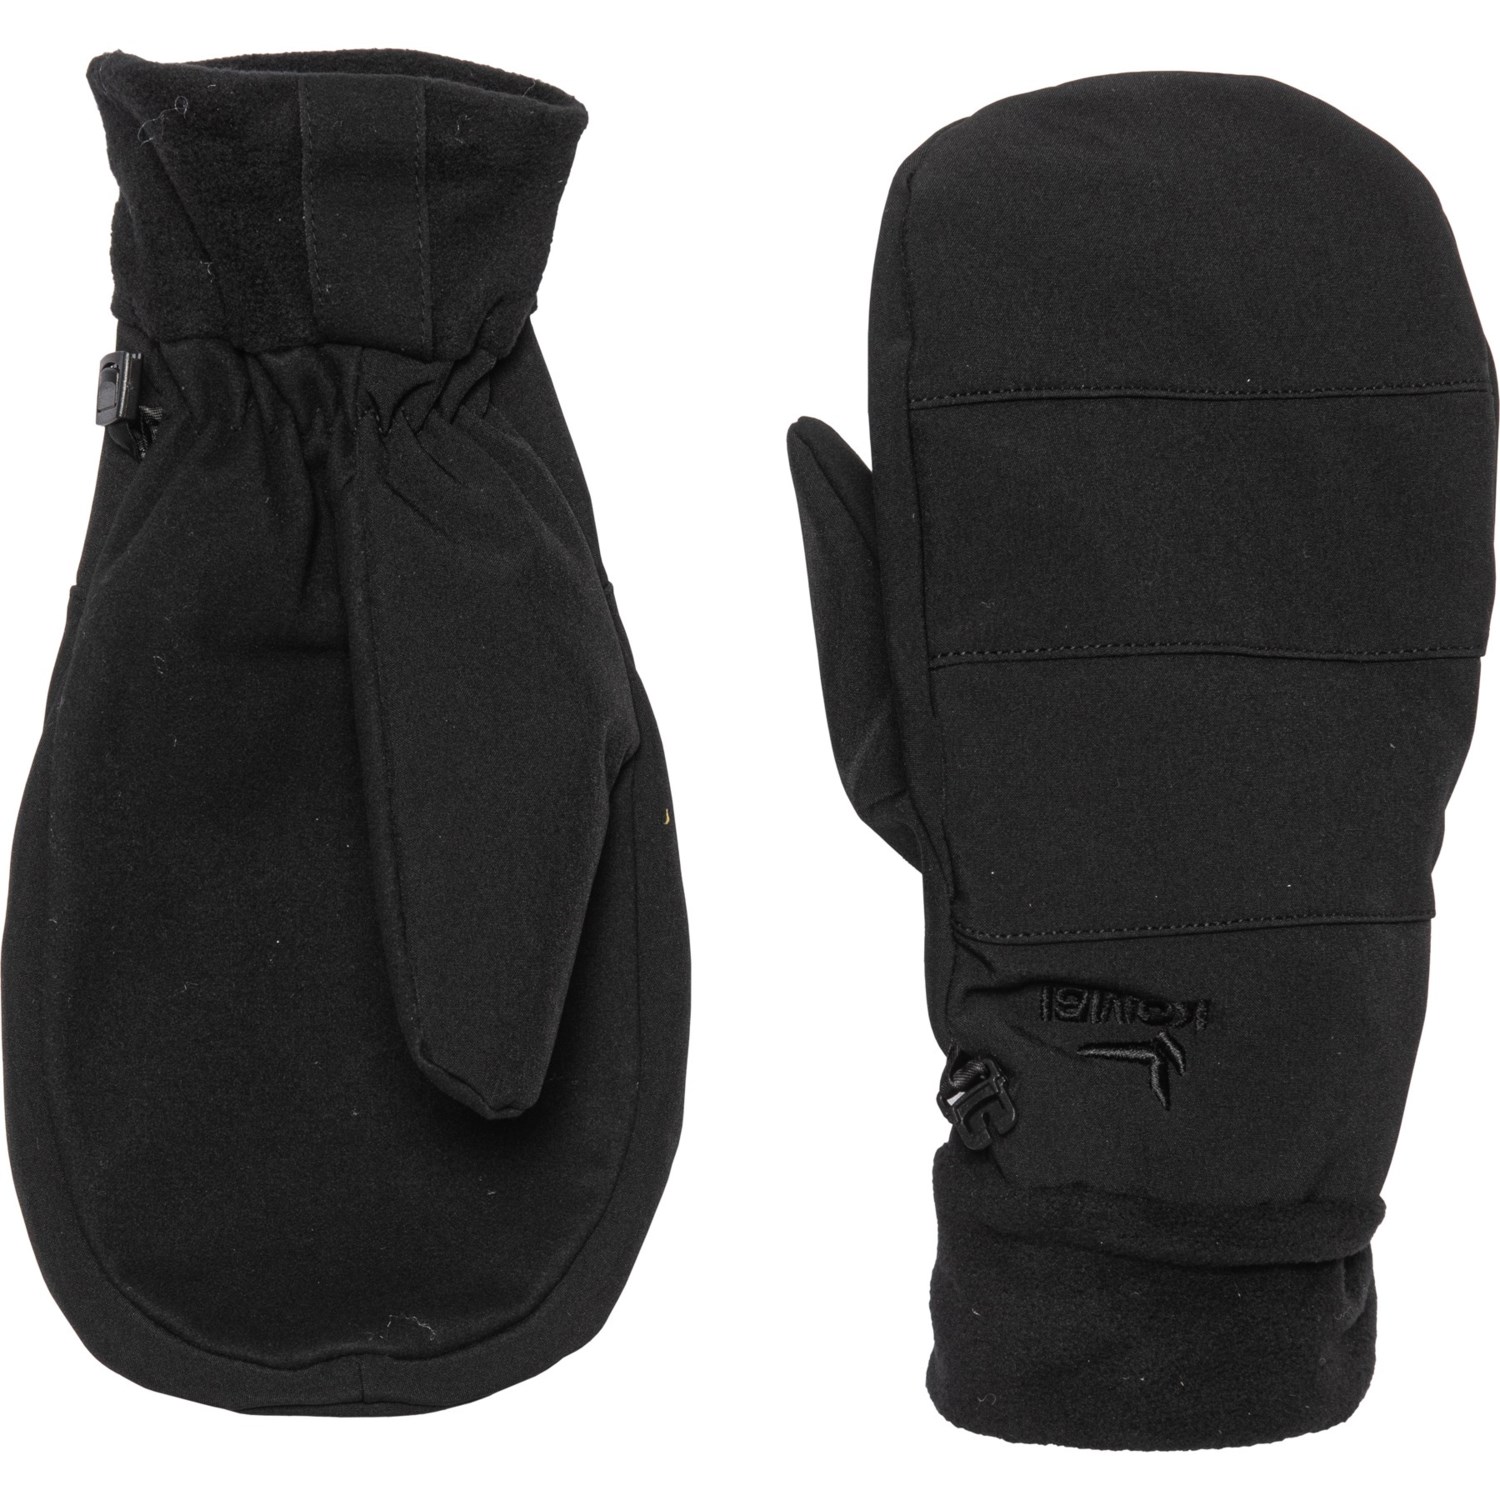 Kombi Daily Mittens (For Men) - Save 80%